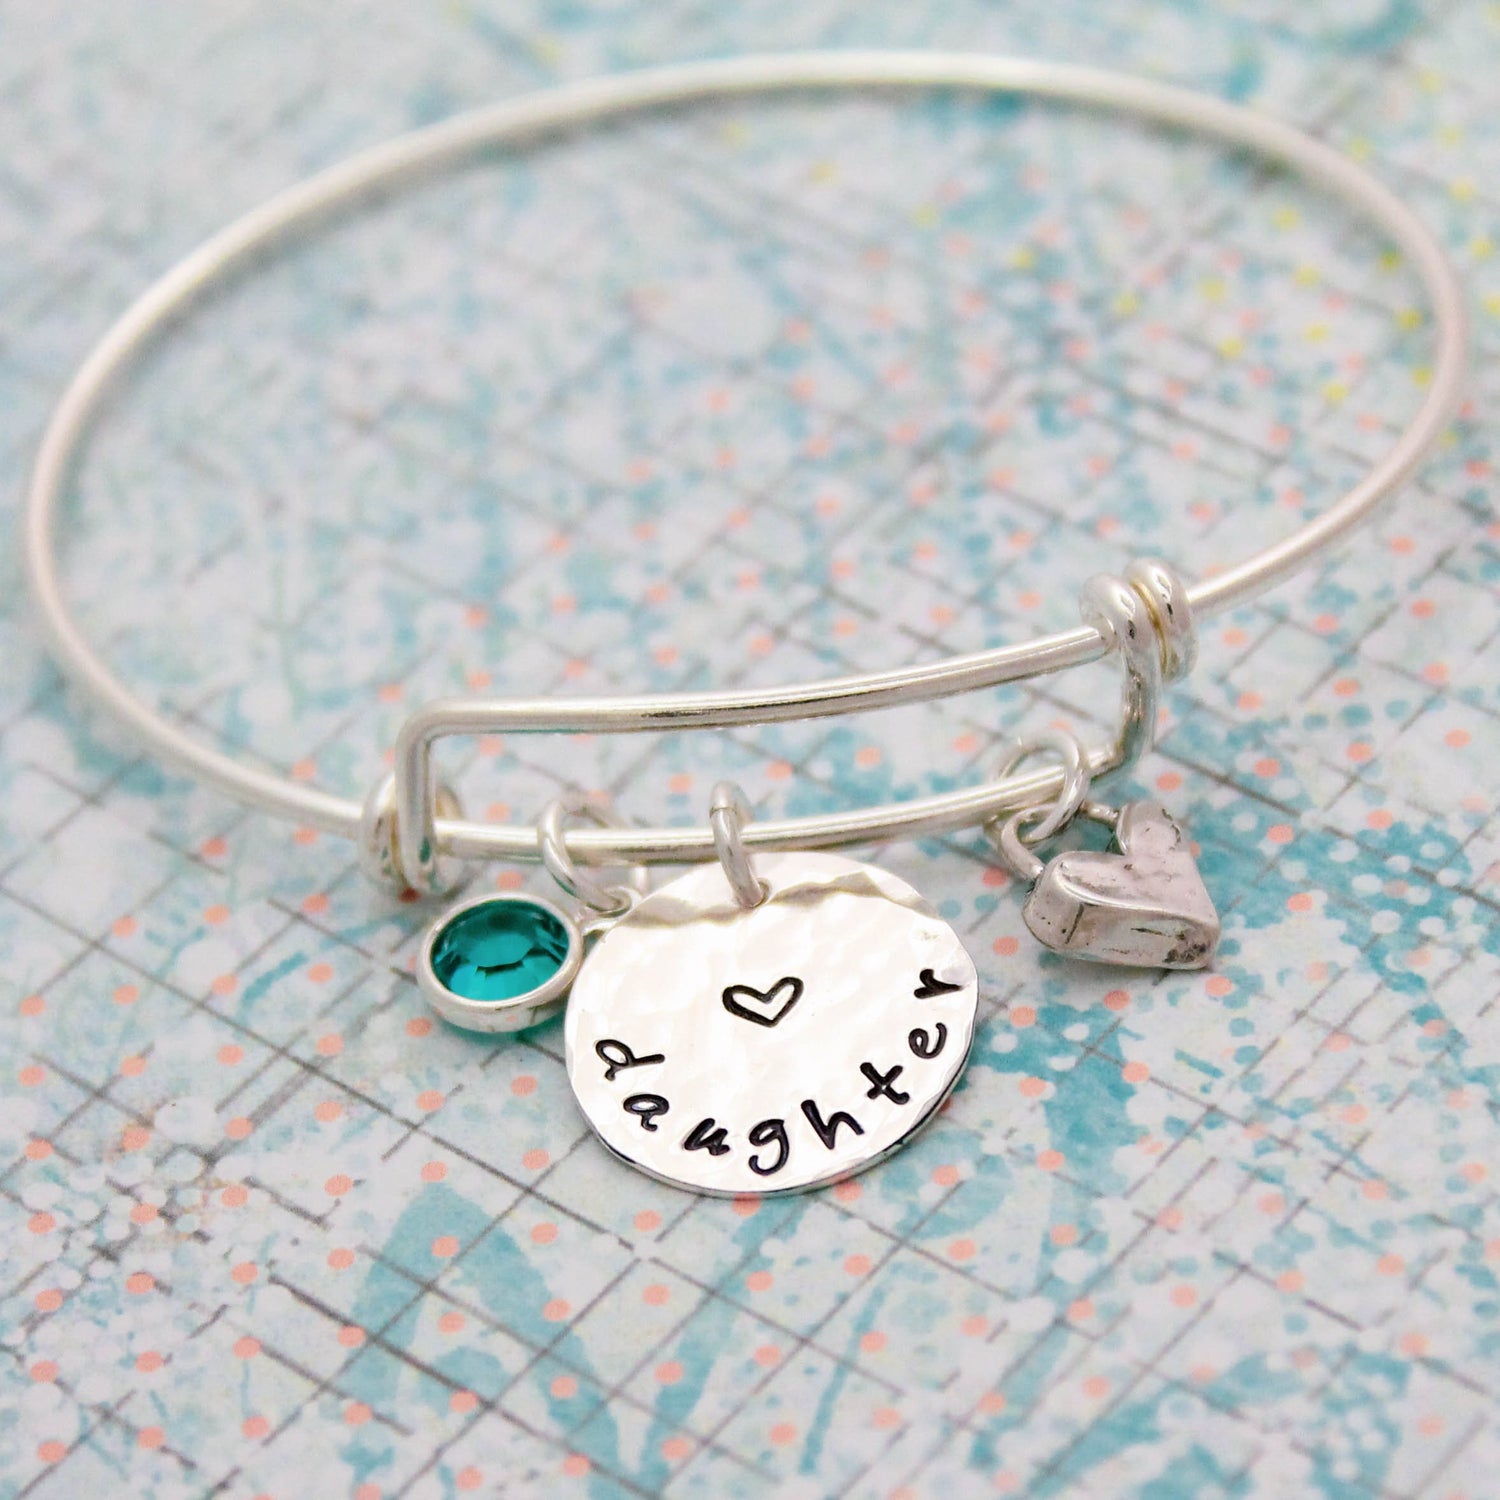 Daughter Bracelet with Birthstone, Personalized Daughter Bangle, Daughter Gift, Hand Stamped Jewelry, .925 Silver Cute Jewelry for Daughters